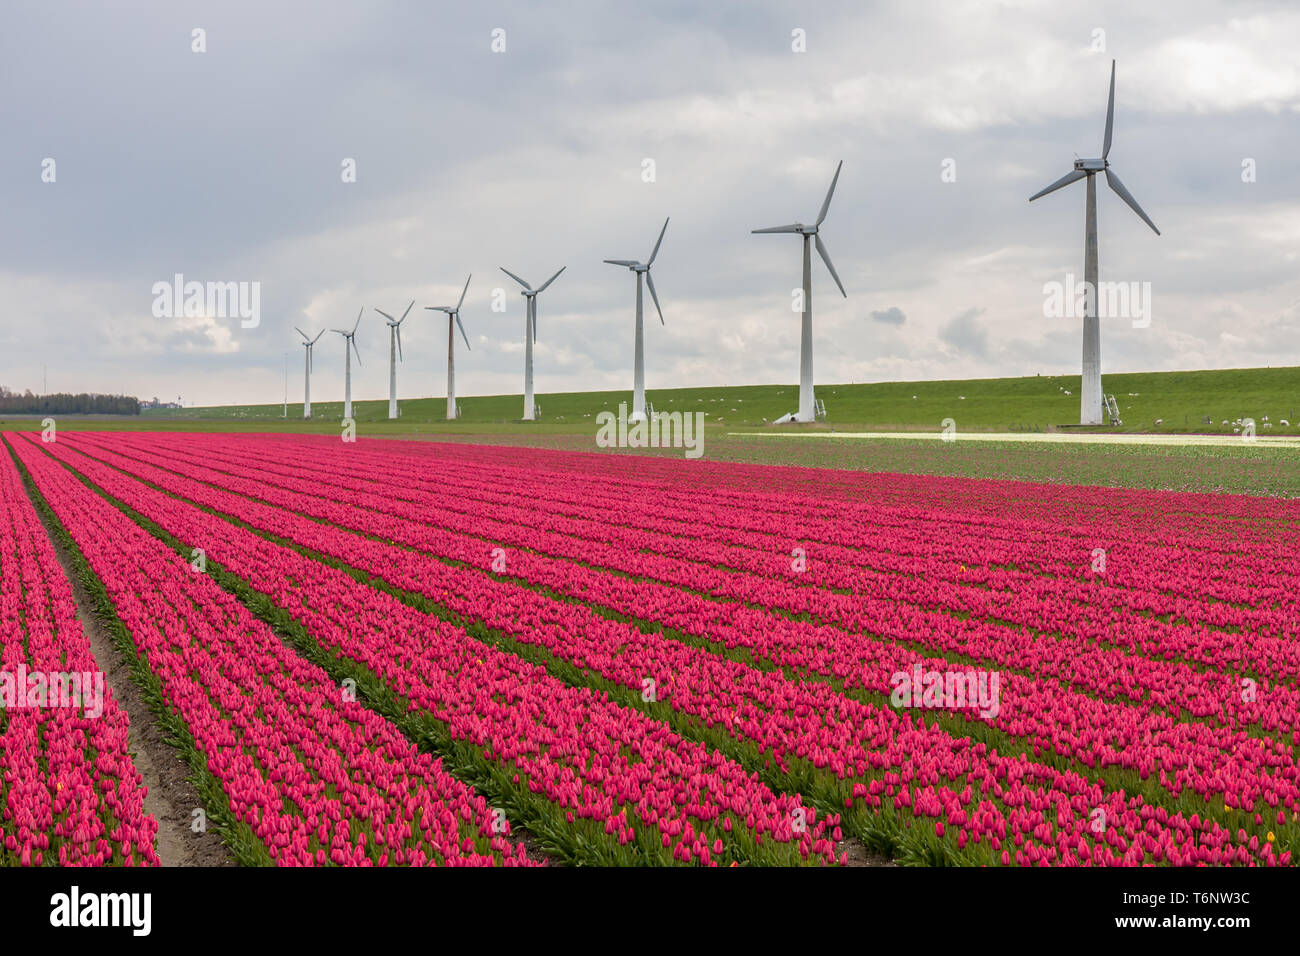 Dutch tulip field with a long row of wind turbines Stock Photo